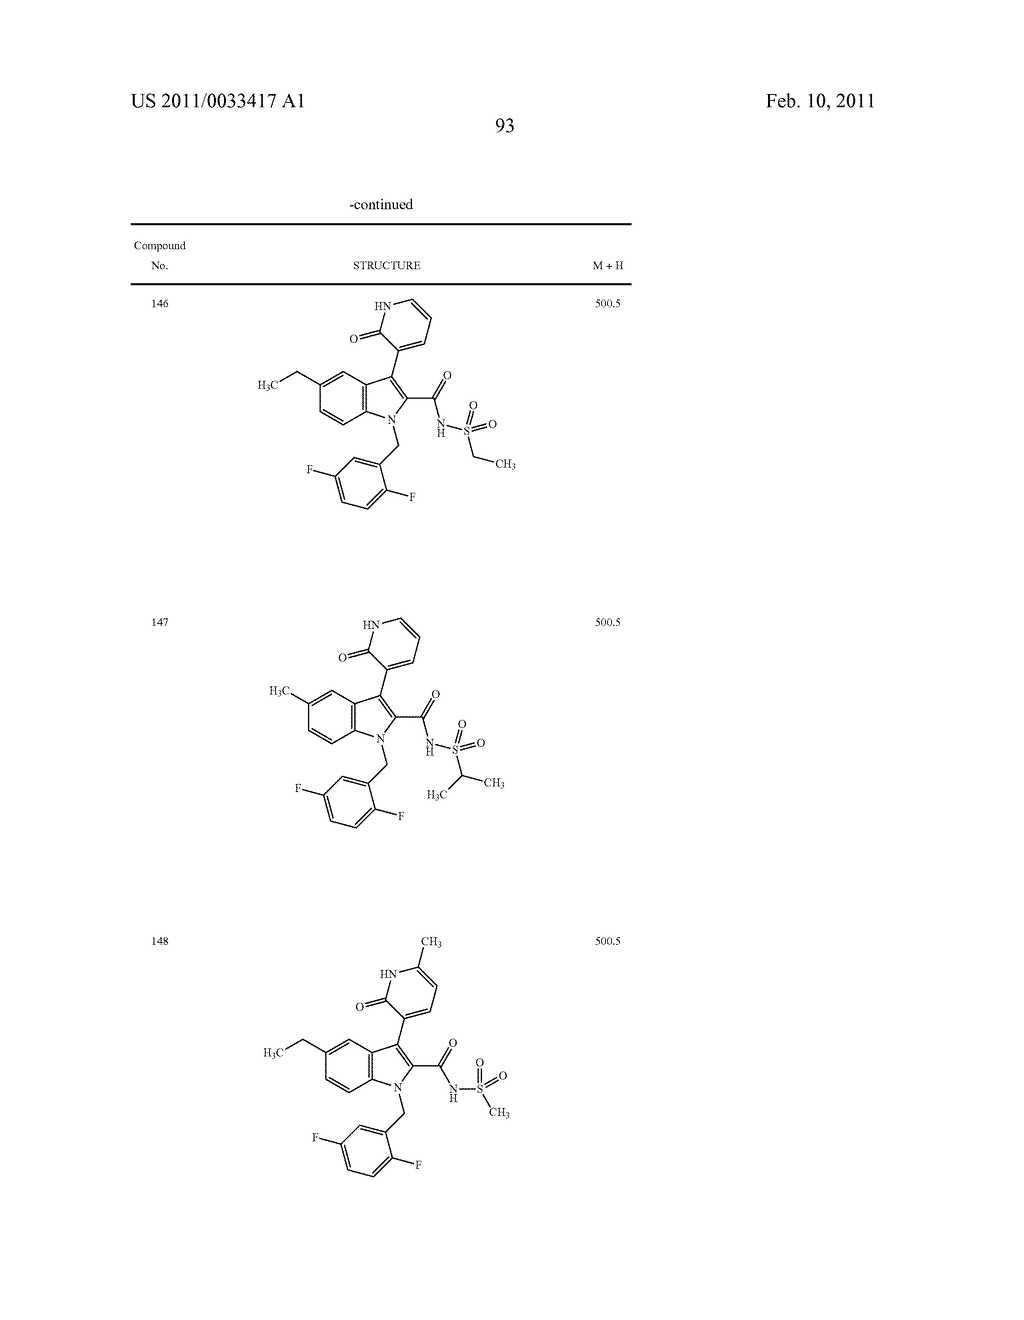 2,3-SUBSTITUTED INDOLE DERIVATIVES FOR TREATING VIRAL INFECTIONS - diagram, schematic, and image 94